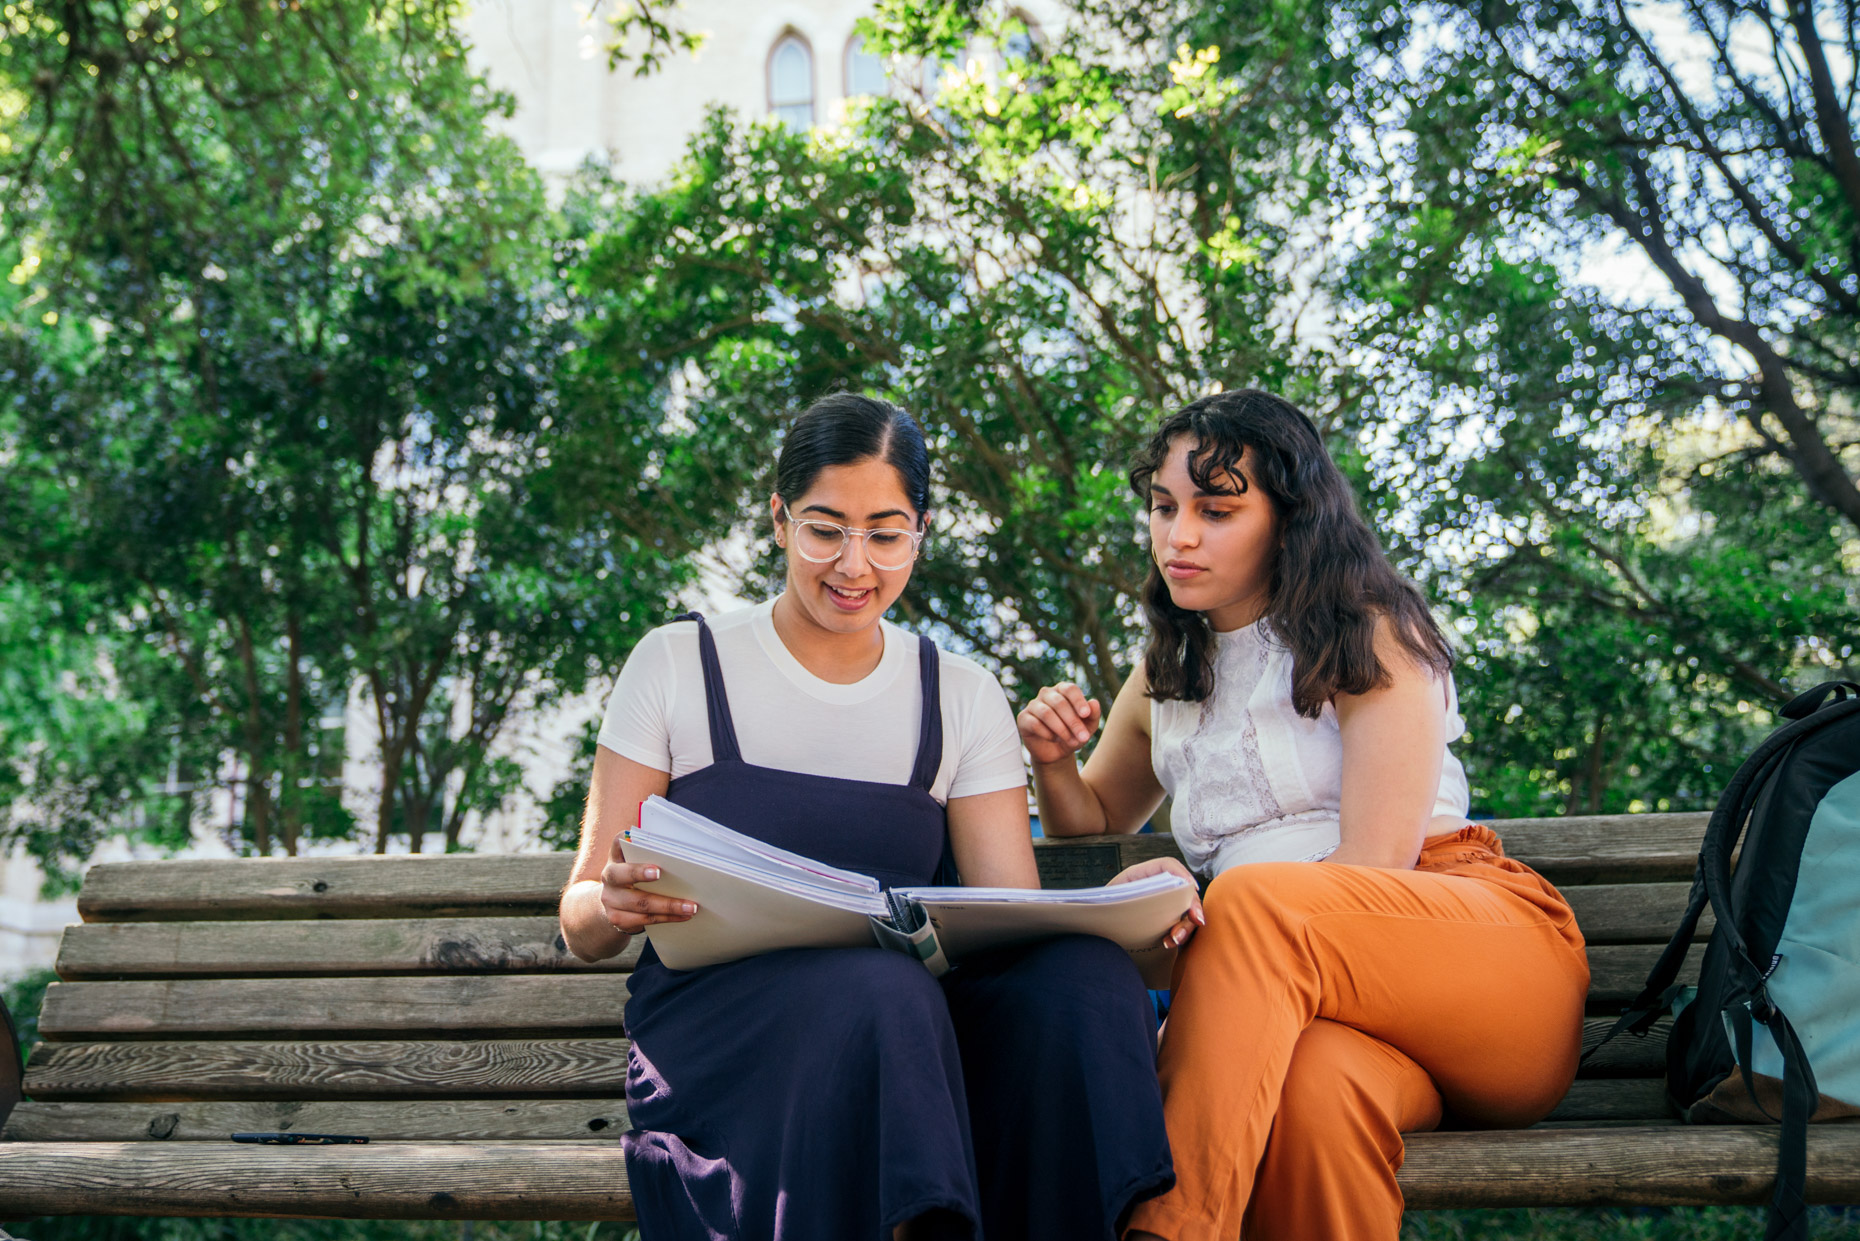 Female college students studying outside on bench